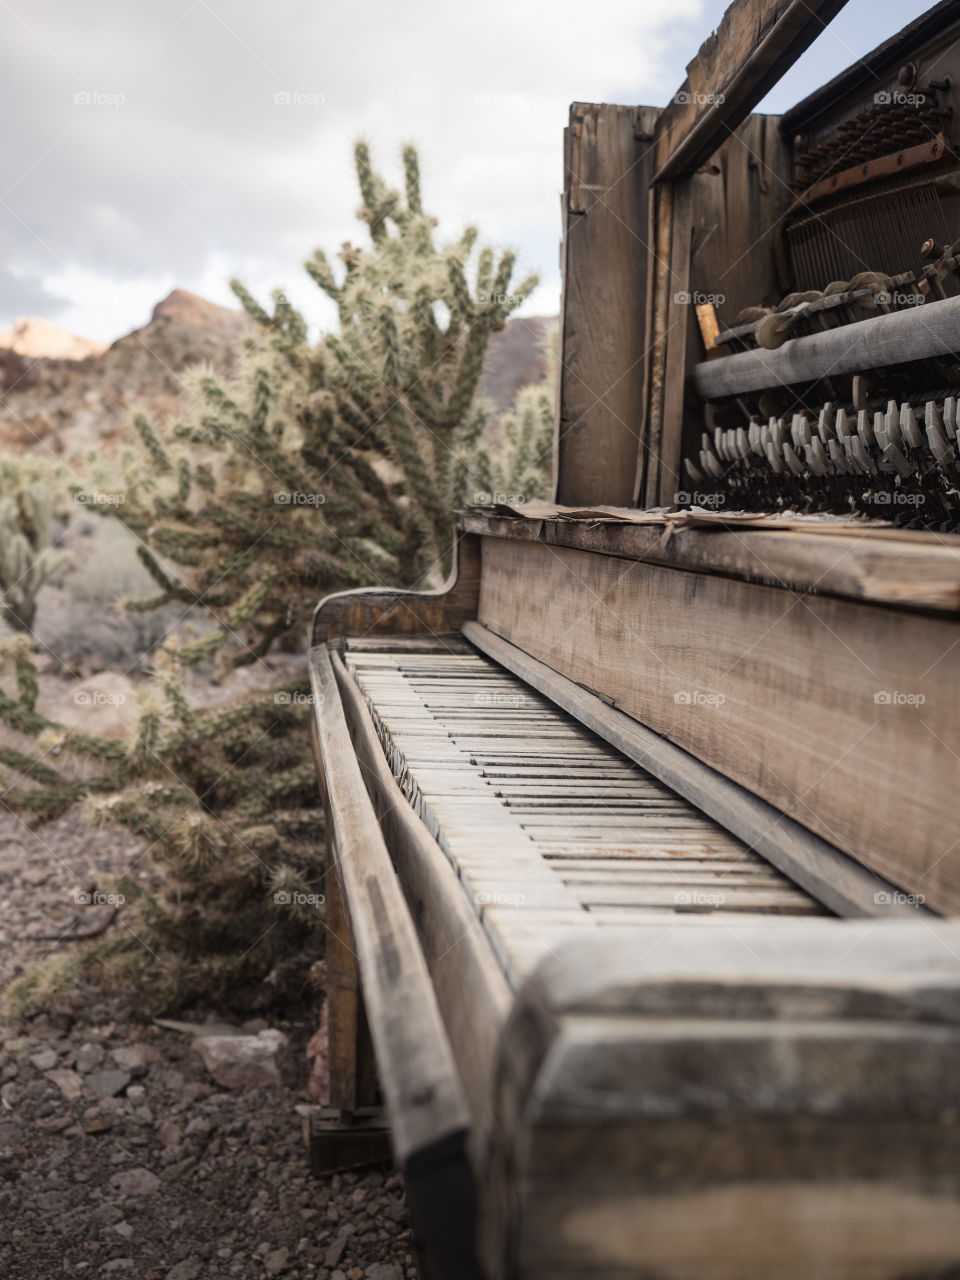 The day the music died. The Nevada desert makes a great backdrop for an old abandoned piano.